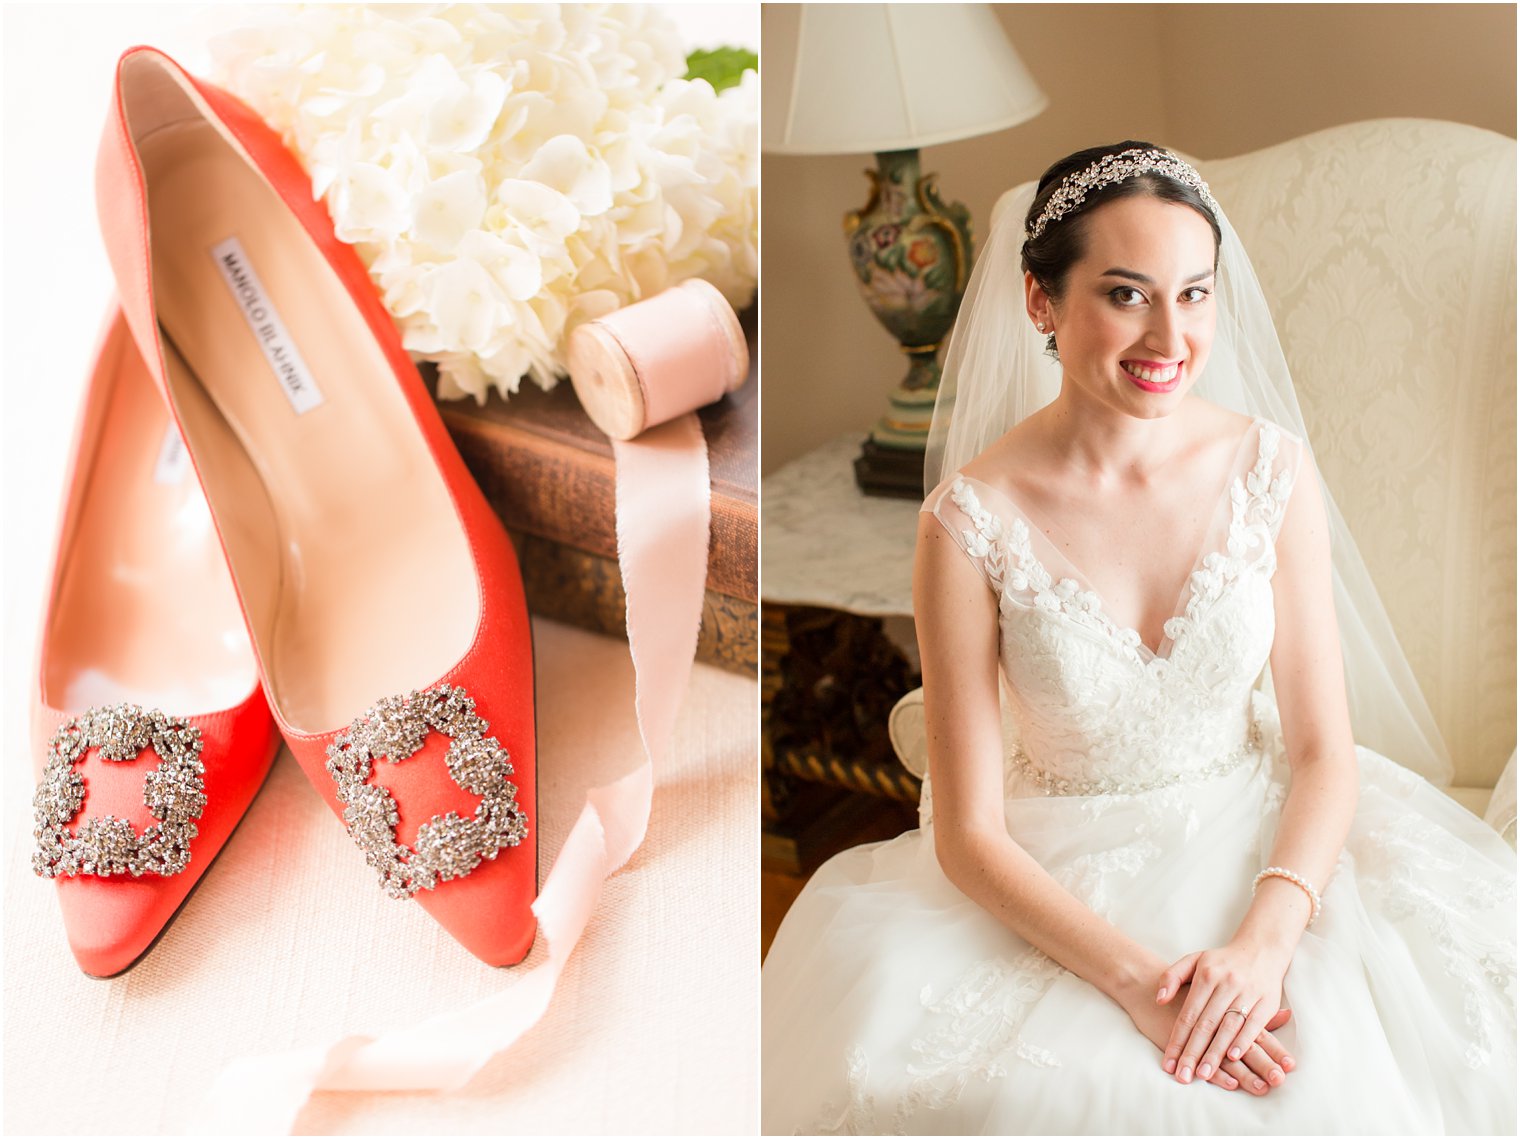 Manolo Blahnik shoes for wedding day